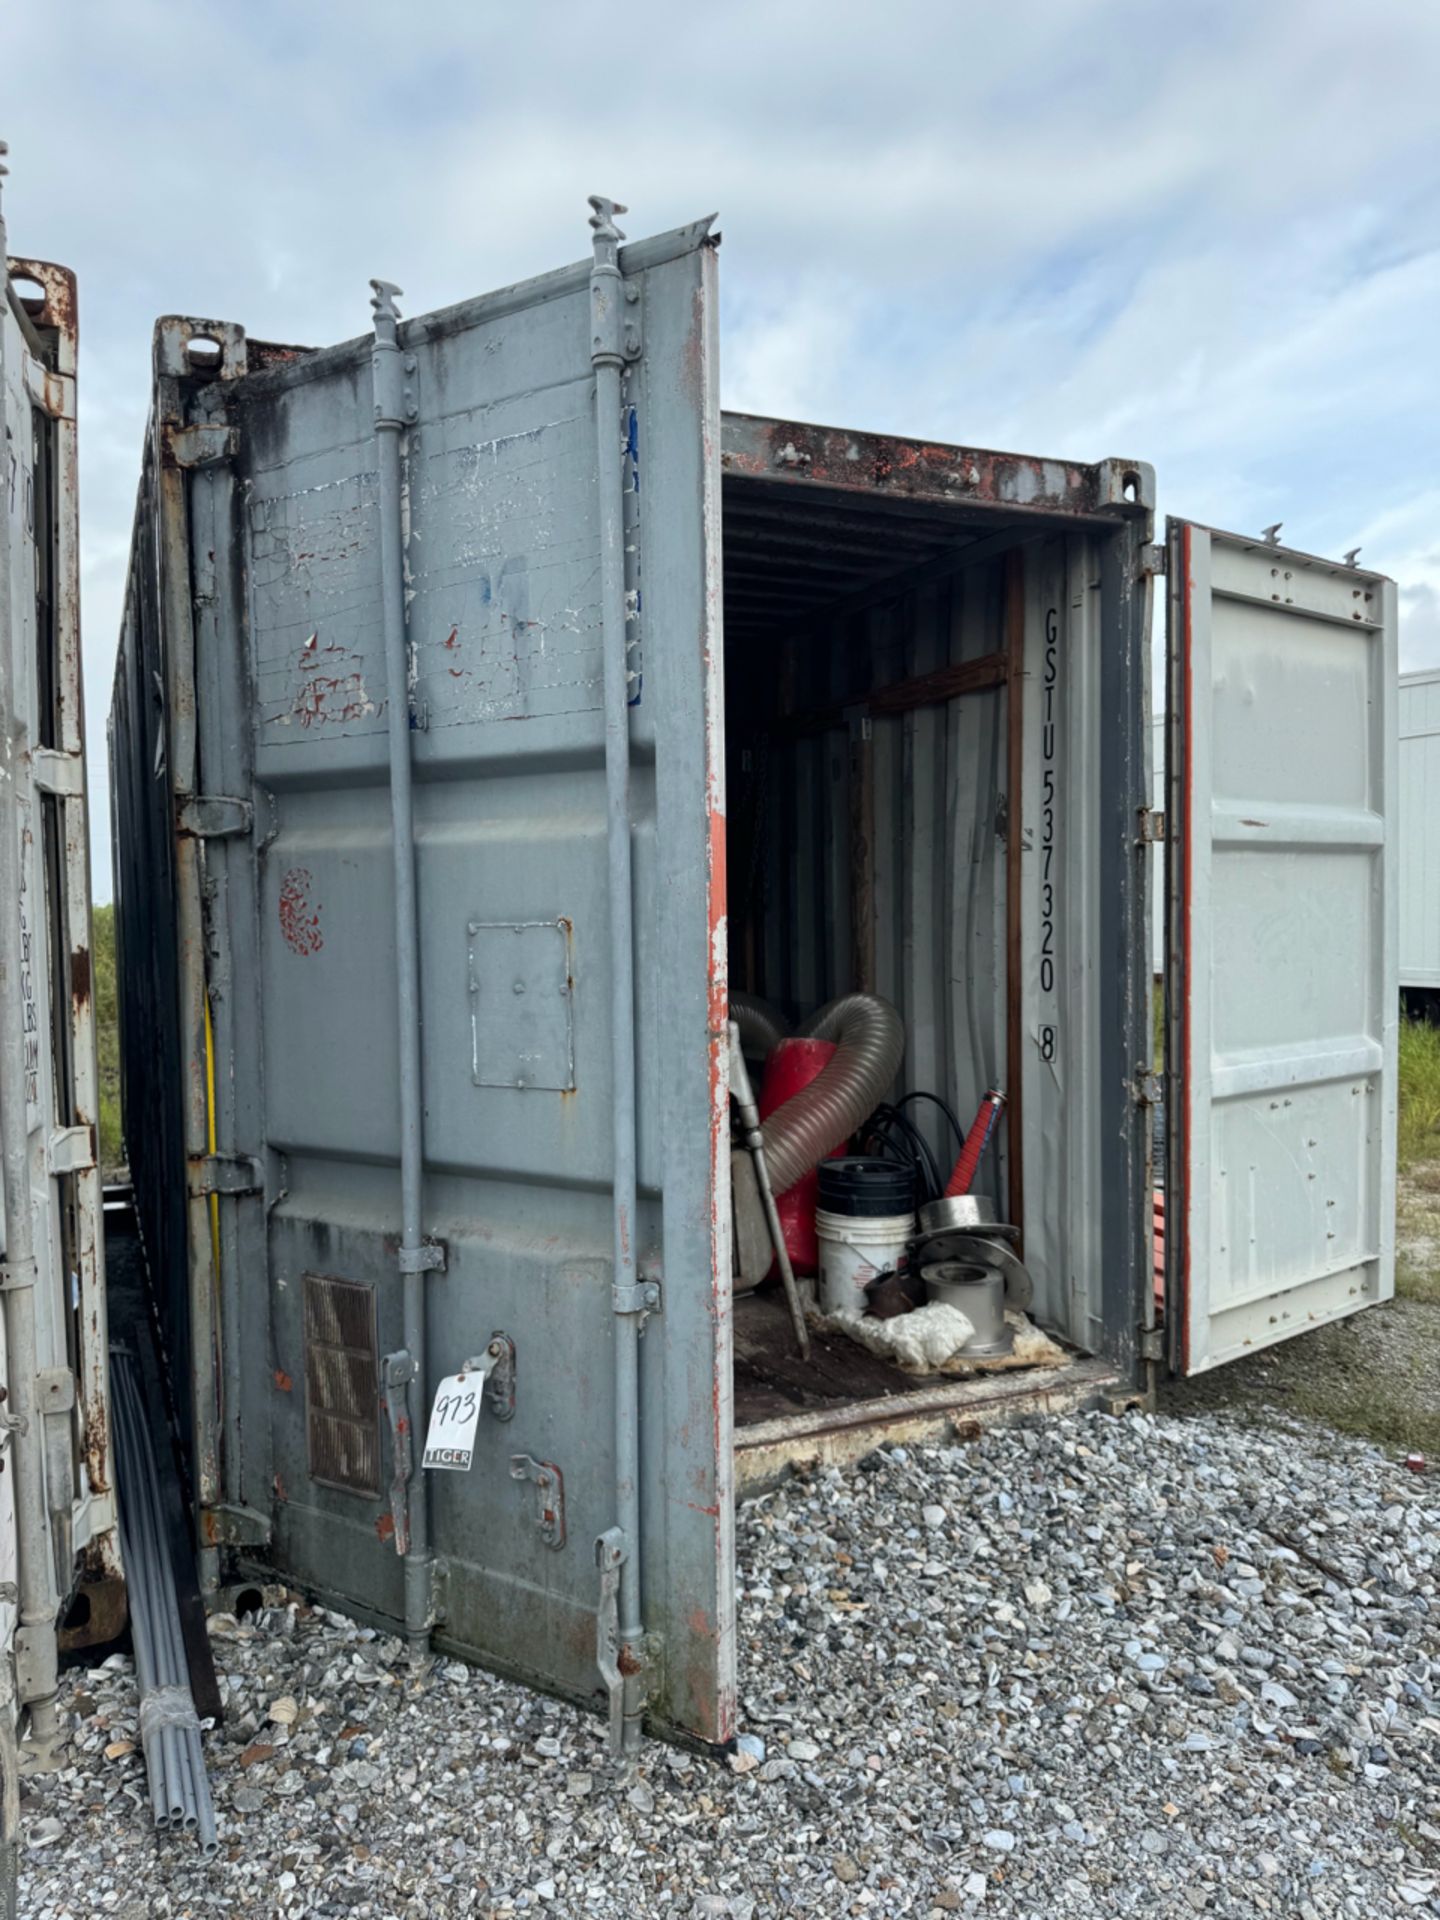 Lot 20' Shipping Container w/ Contents - Image 3 of 20